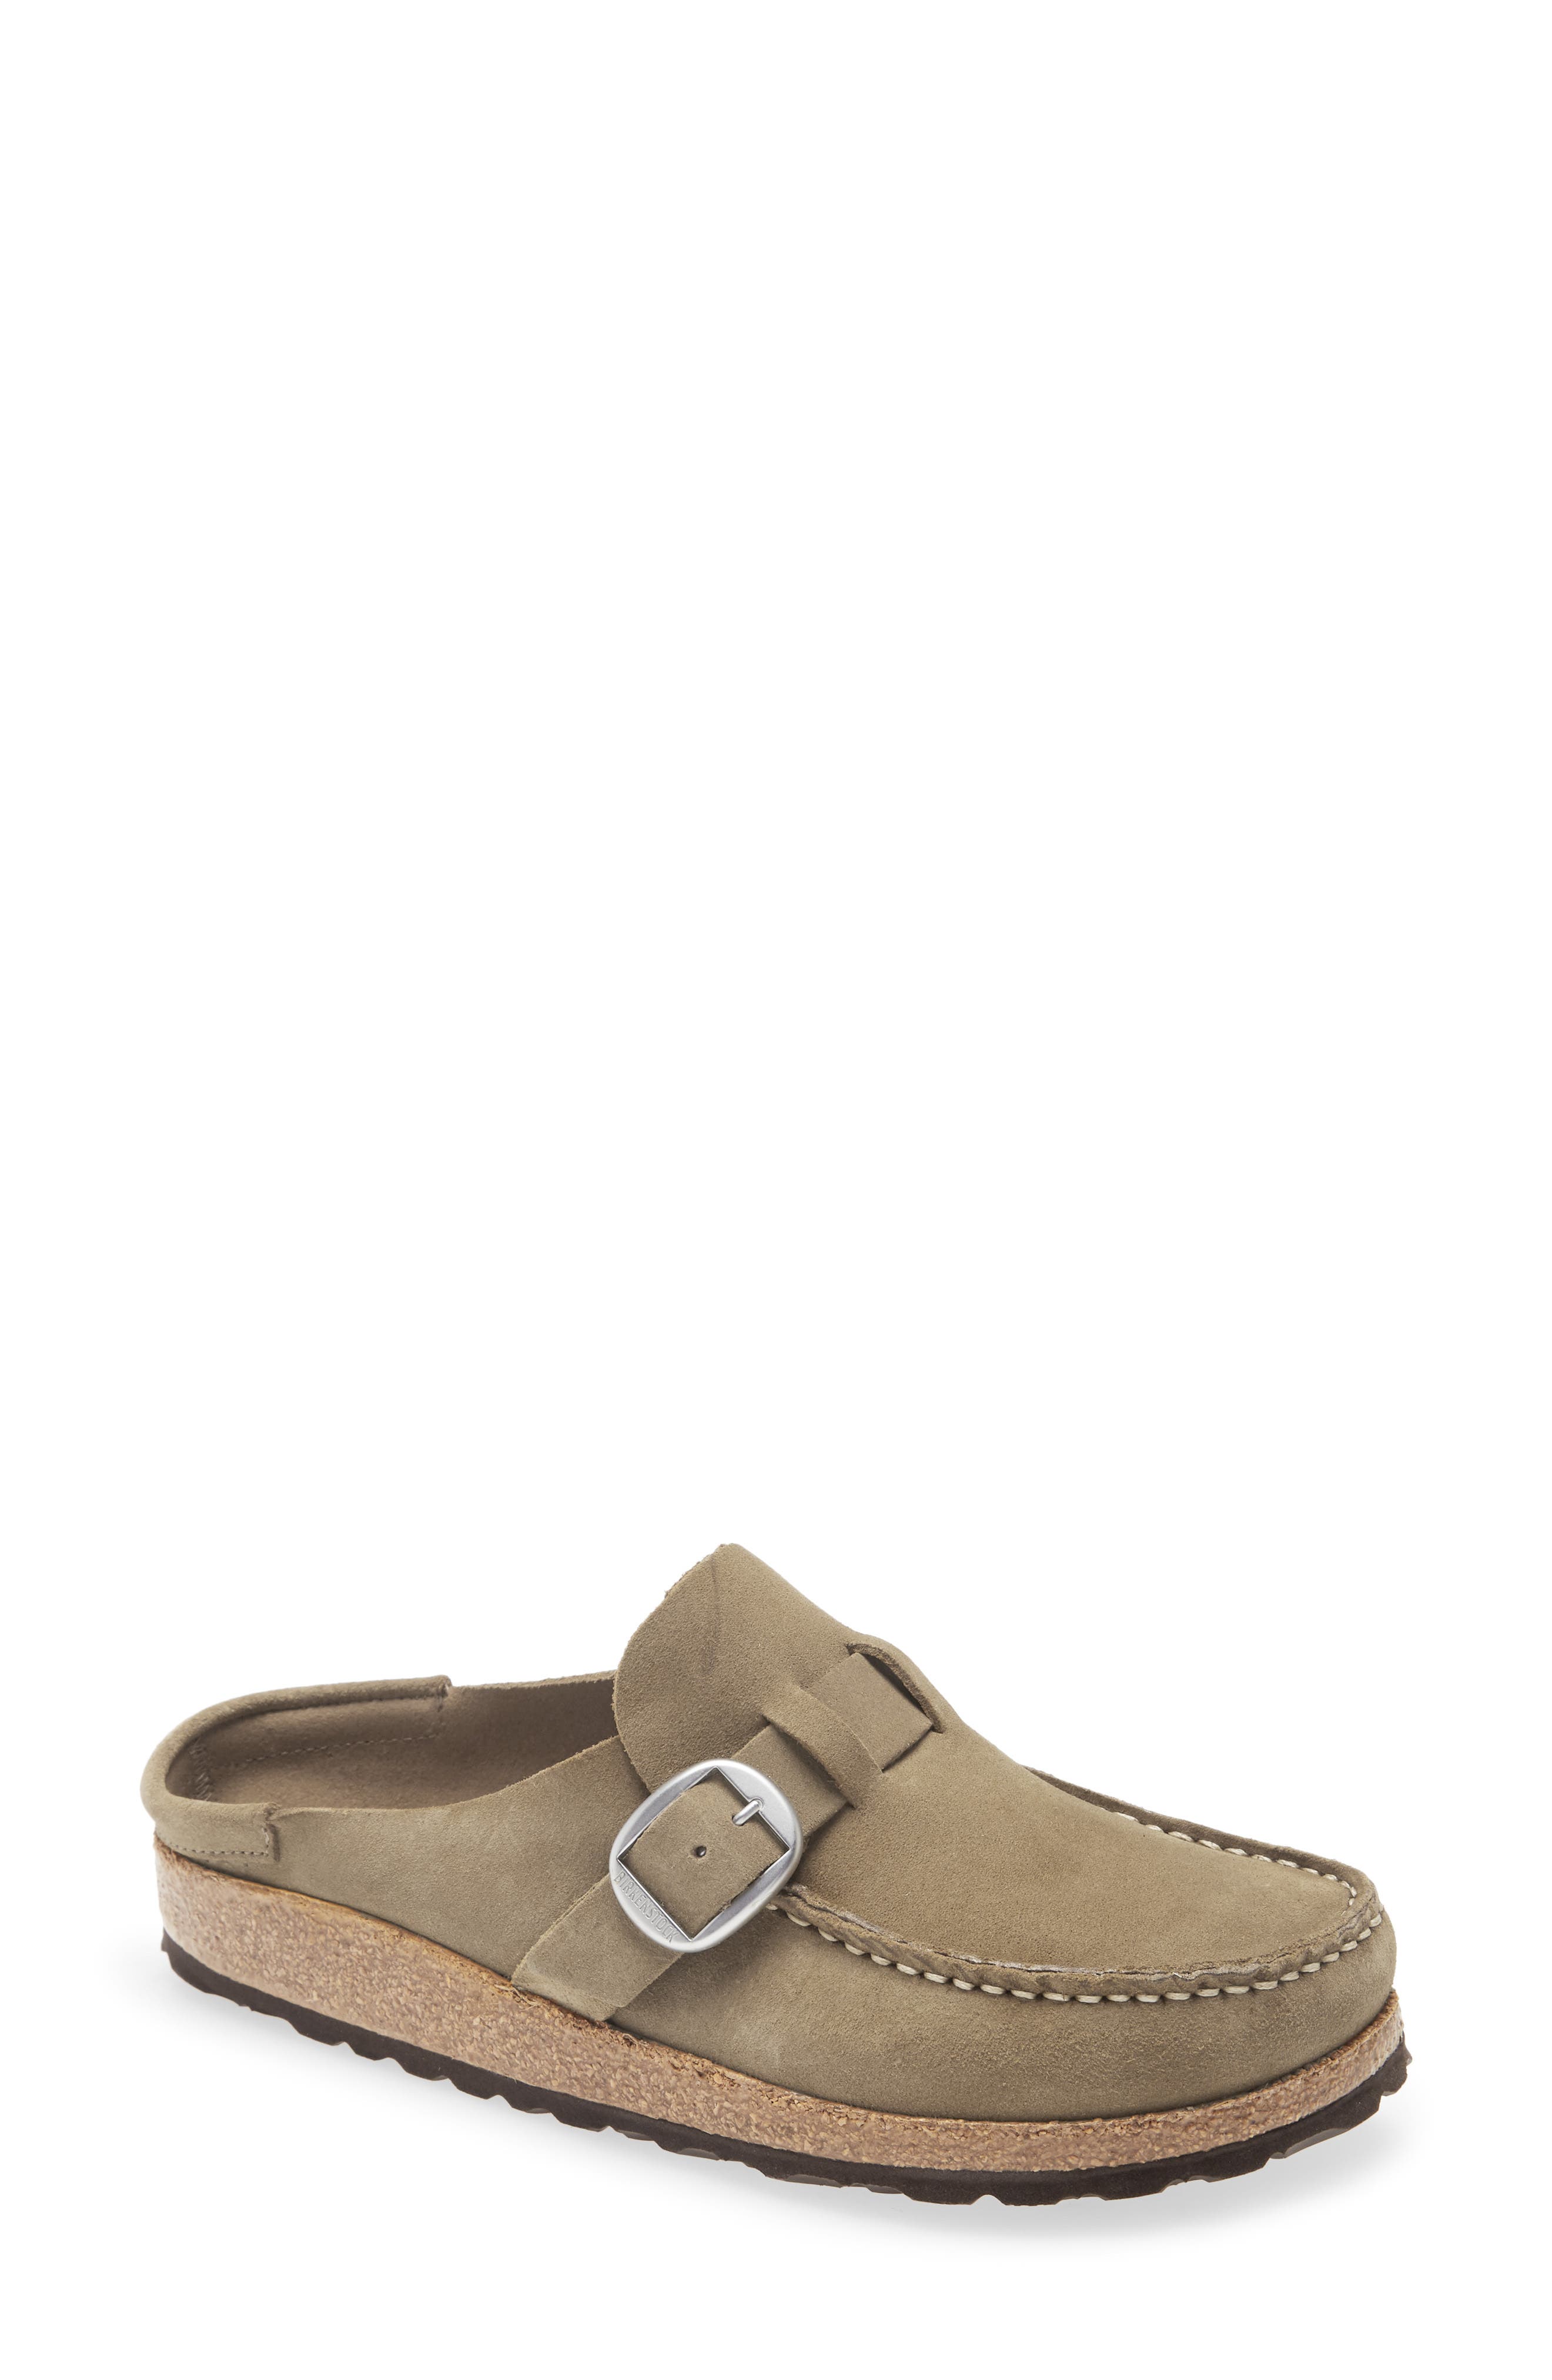 Birkenstock Buckley Clog in Gray Taupe Suede at Nordstrom, Size 9-9.5Us